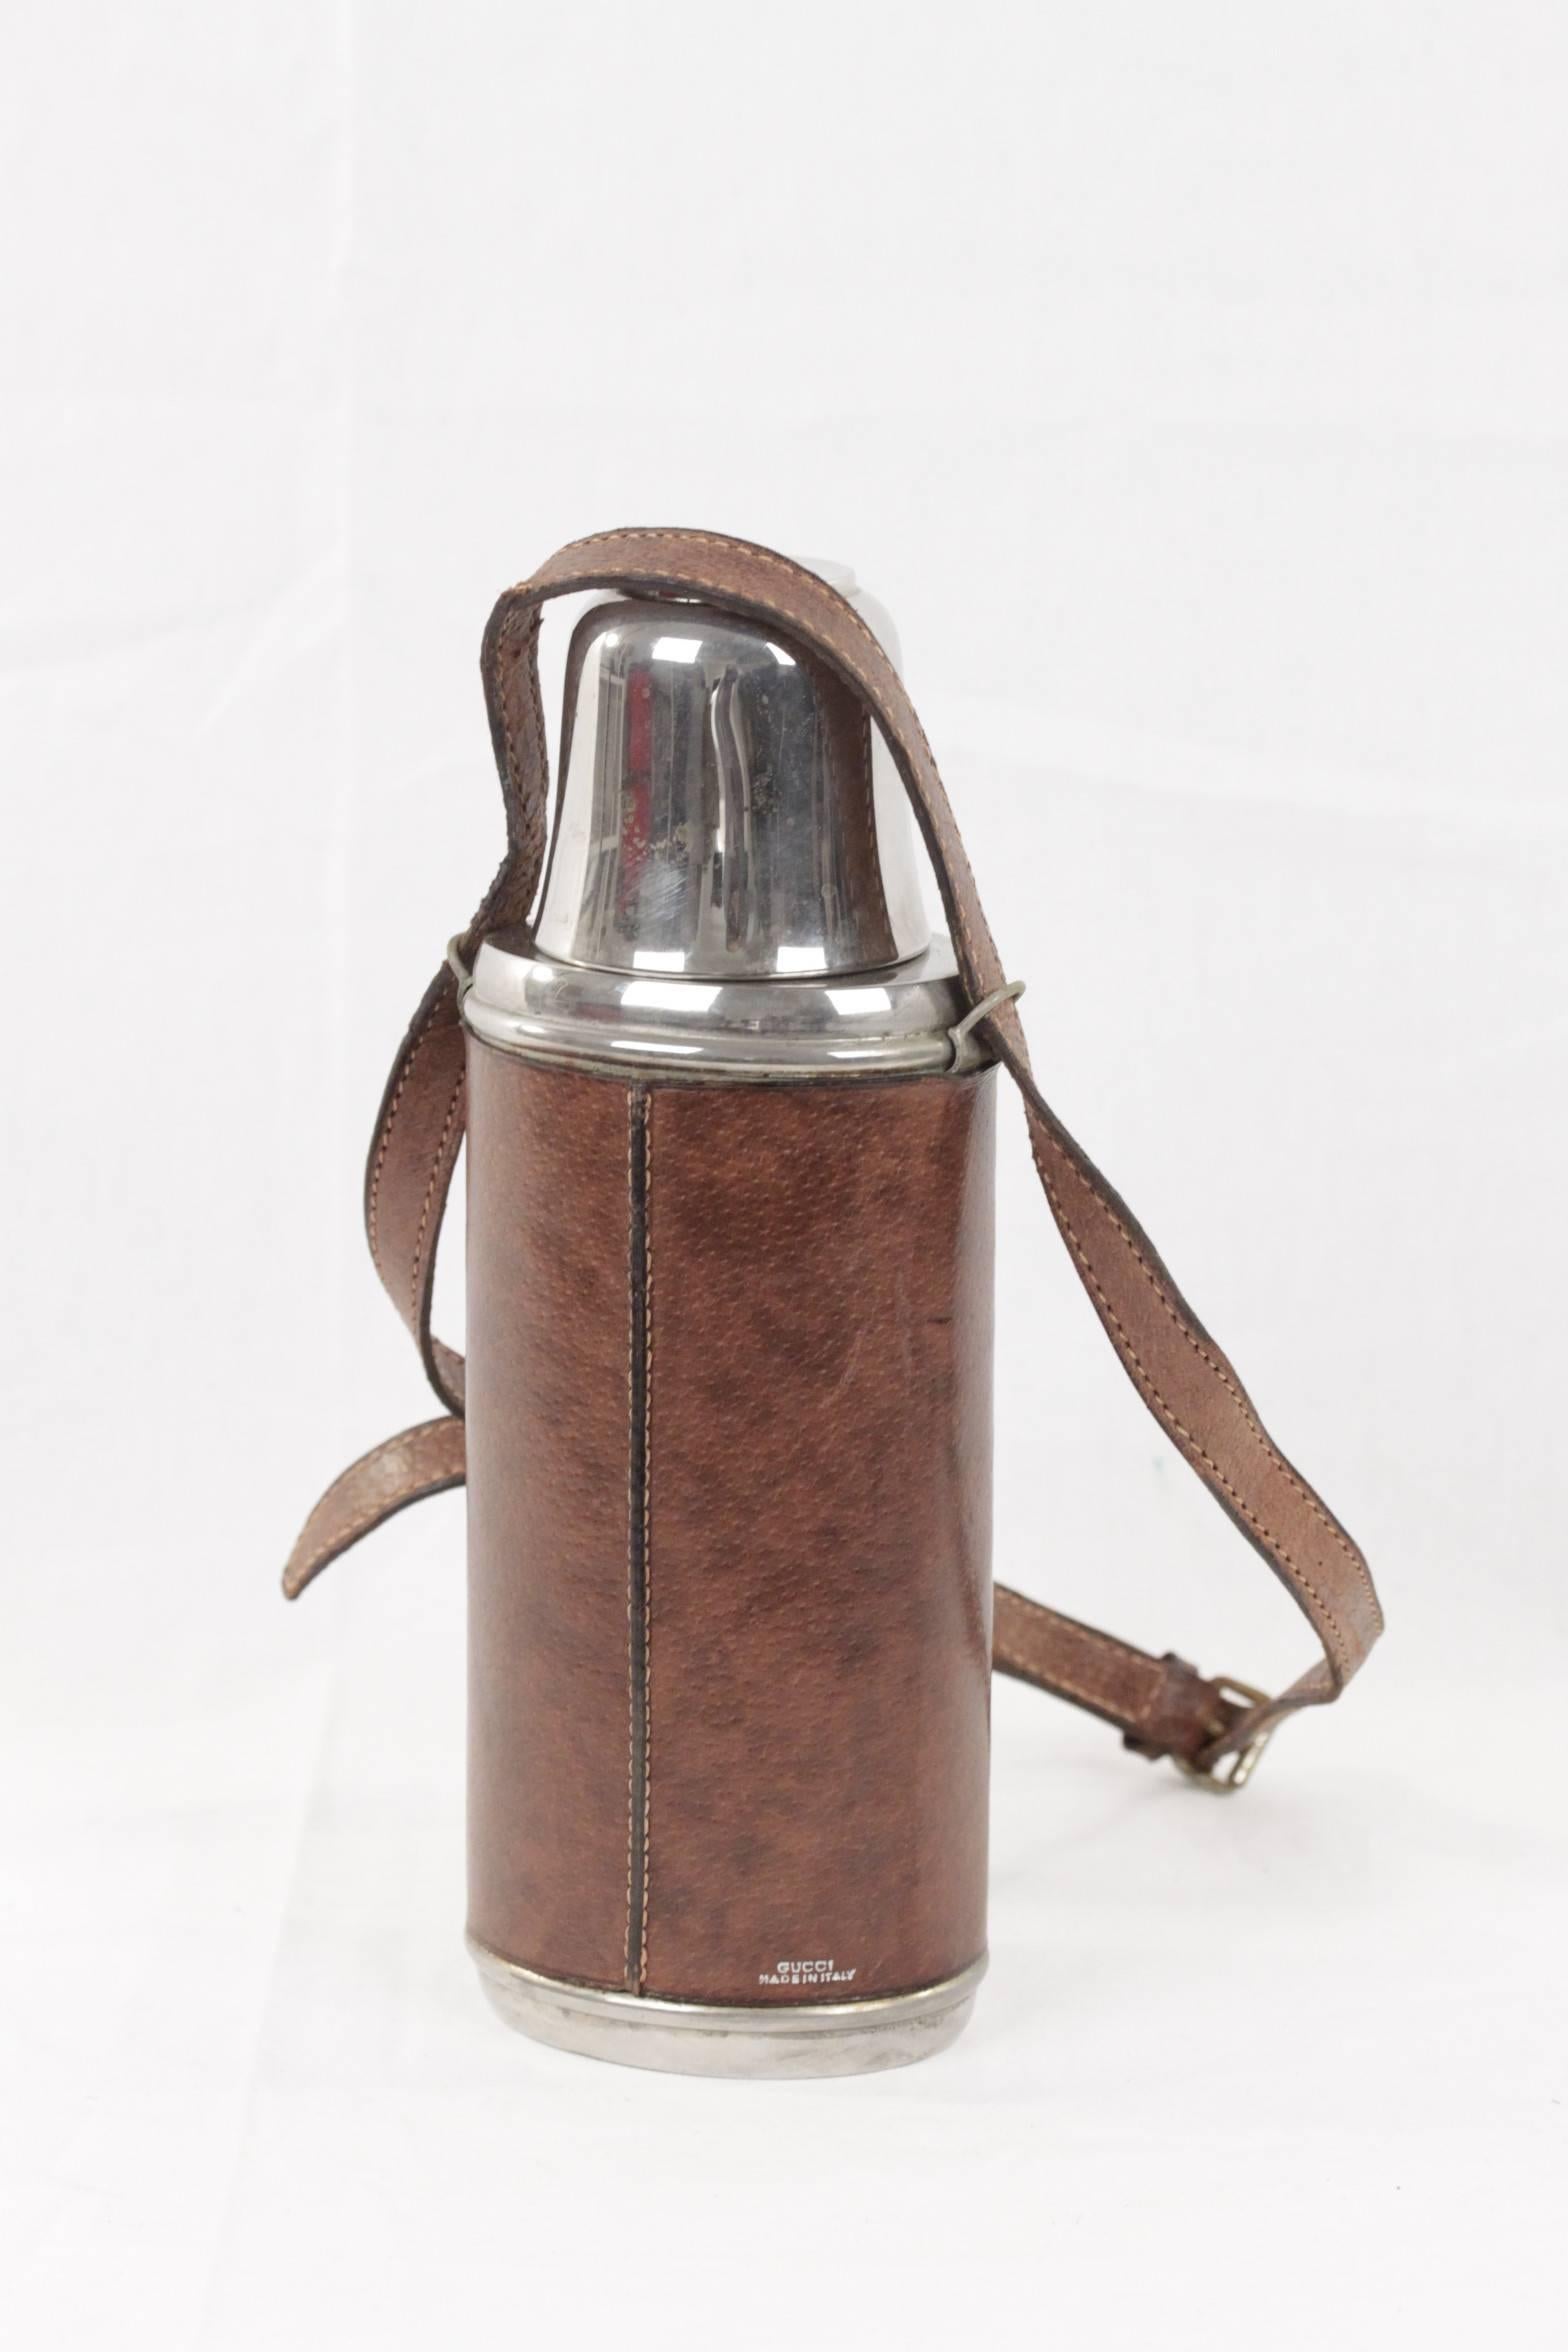 - Vintage Vacuum flask/Thermos stainless steel by GUCCI with metal lid

- The top unscrews and is a cutie cup

- It closes with a cork

- Brown pigskin leather exterior

- Adjustable and removable shoulder strap

- Height: 10 1/2 inches -